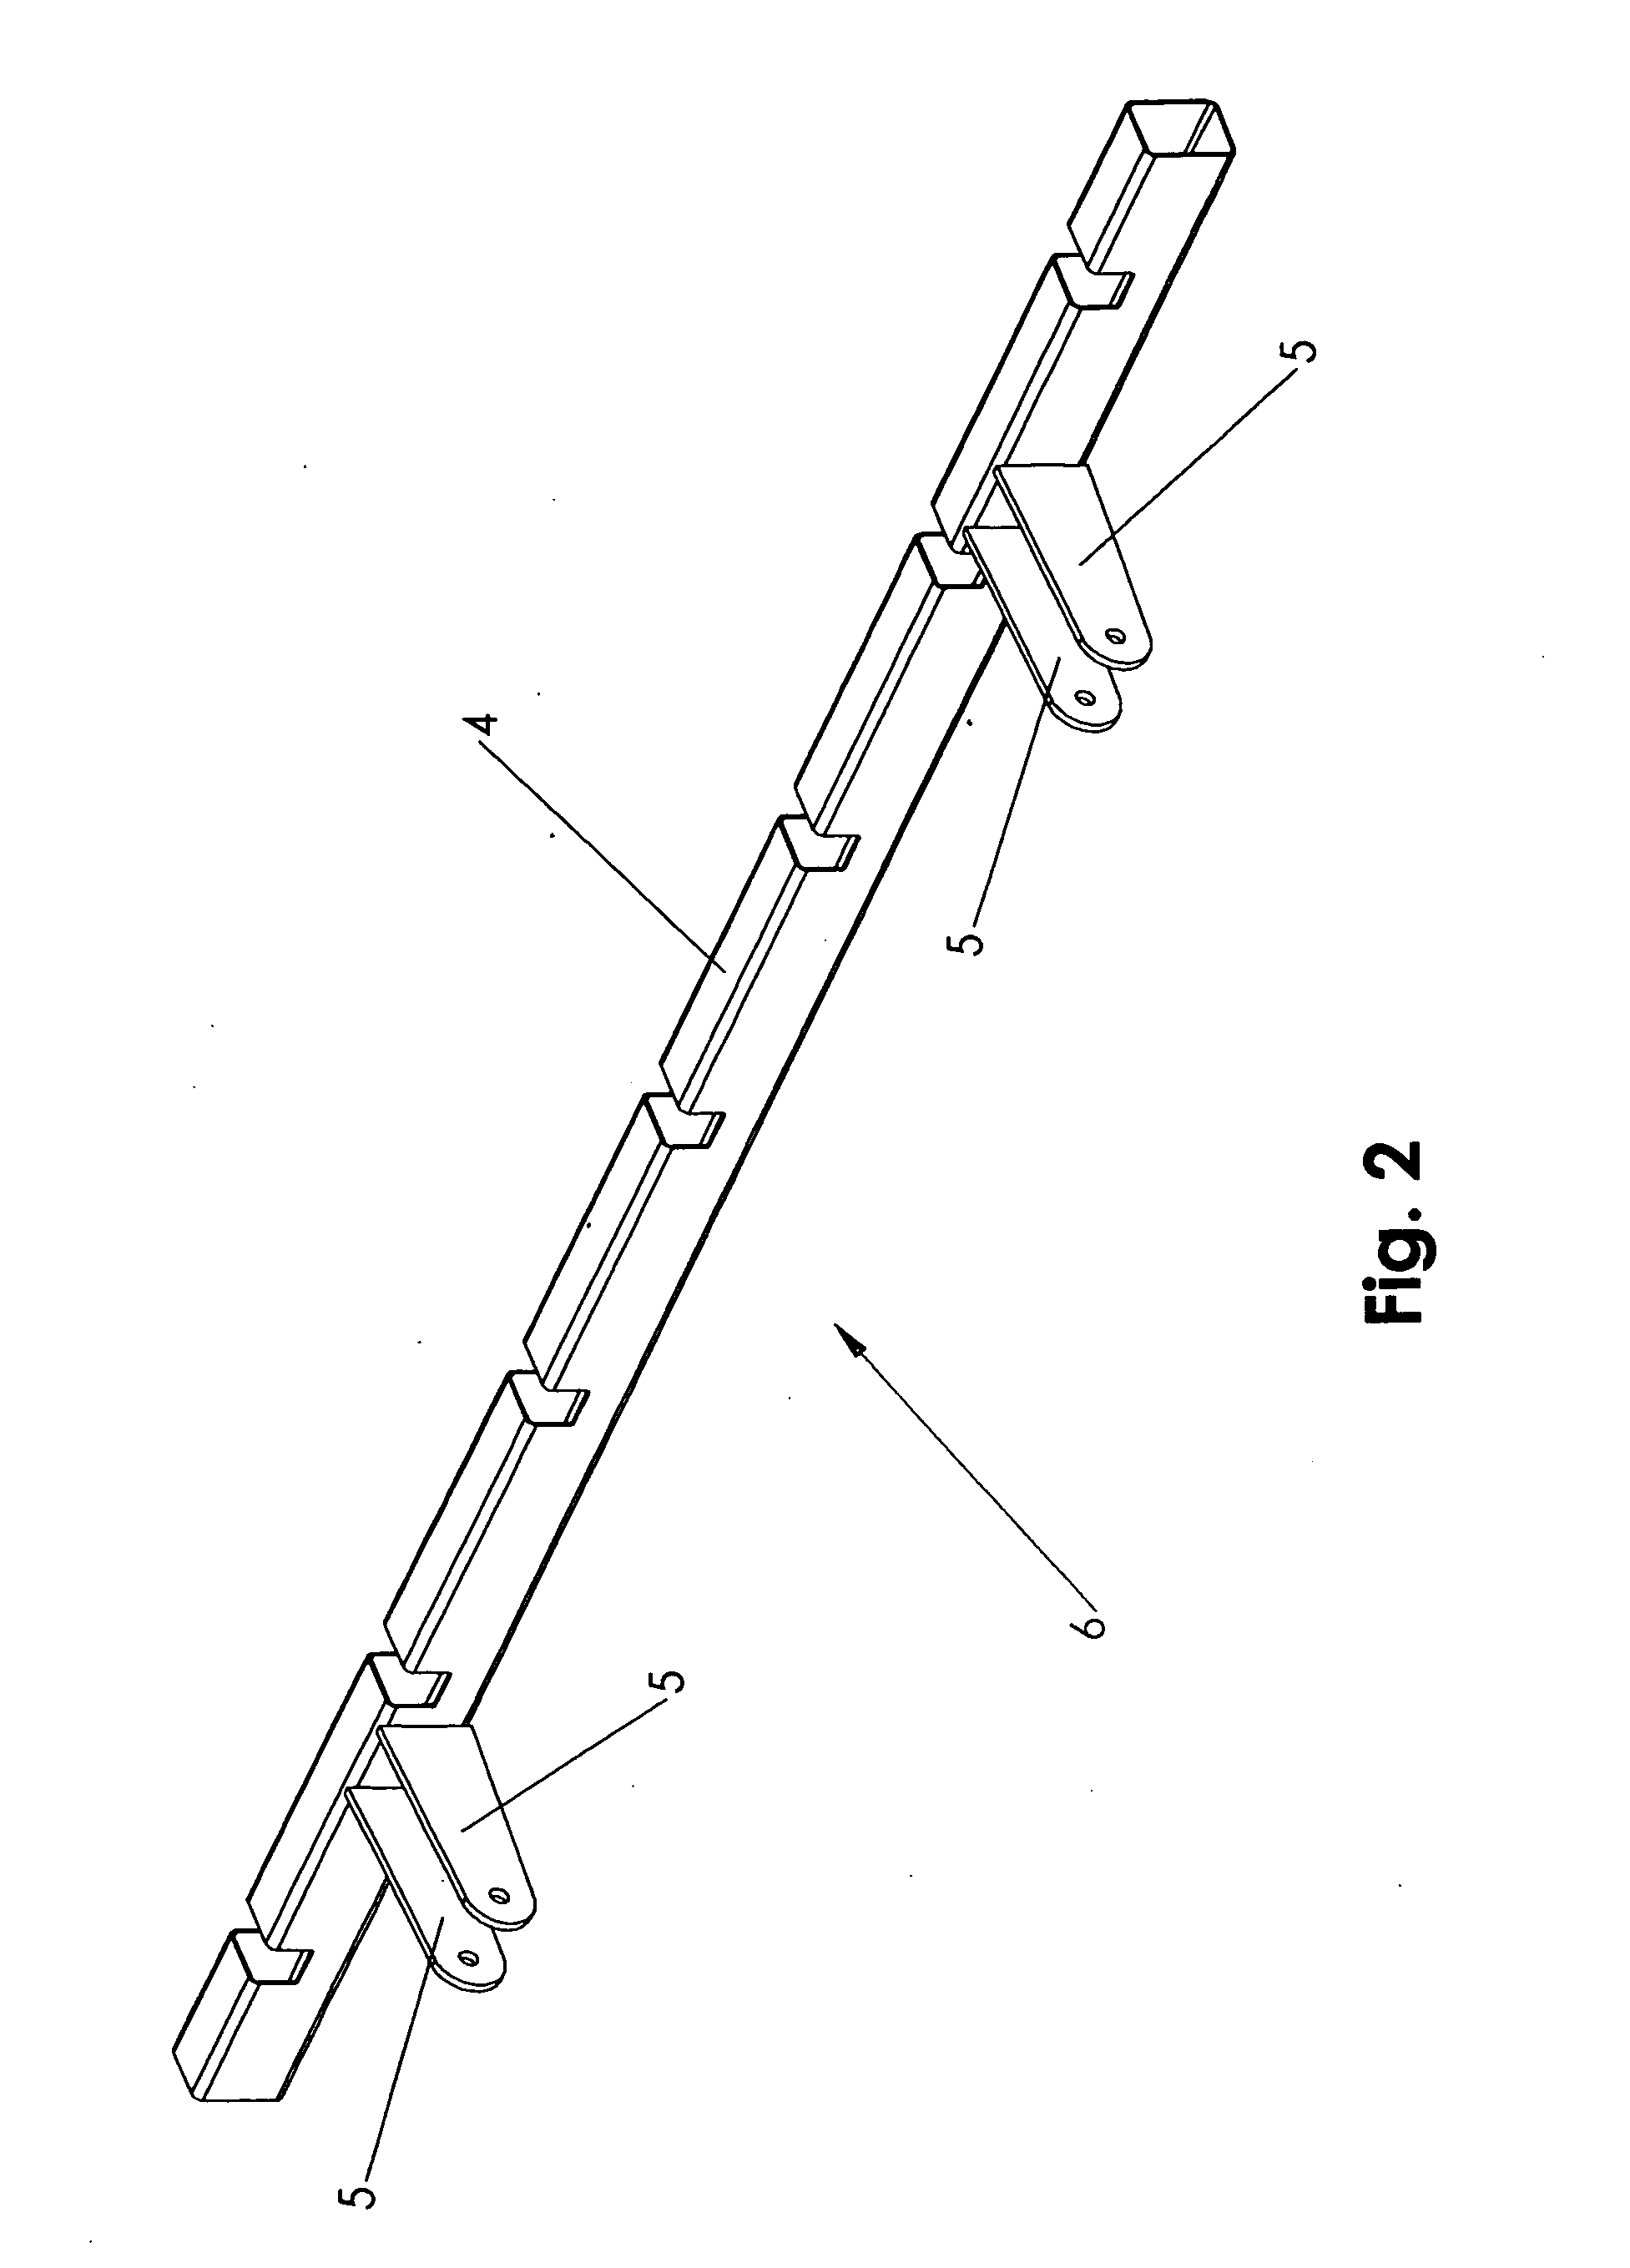 Construction element form and method of fabricating same